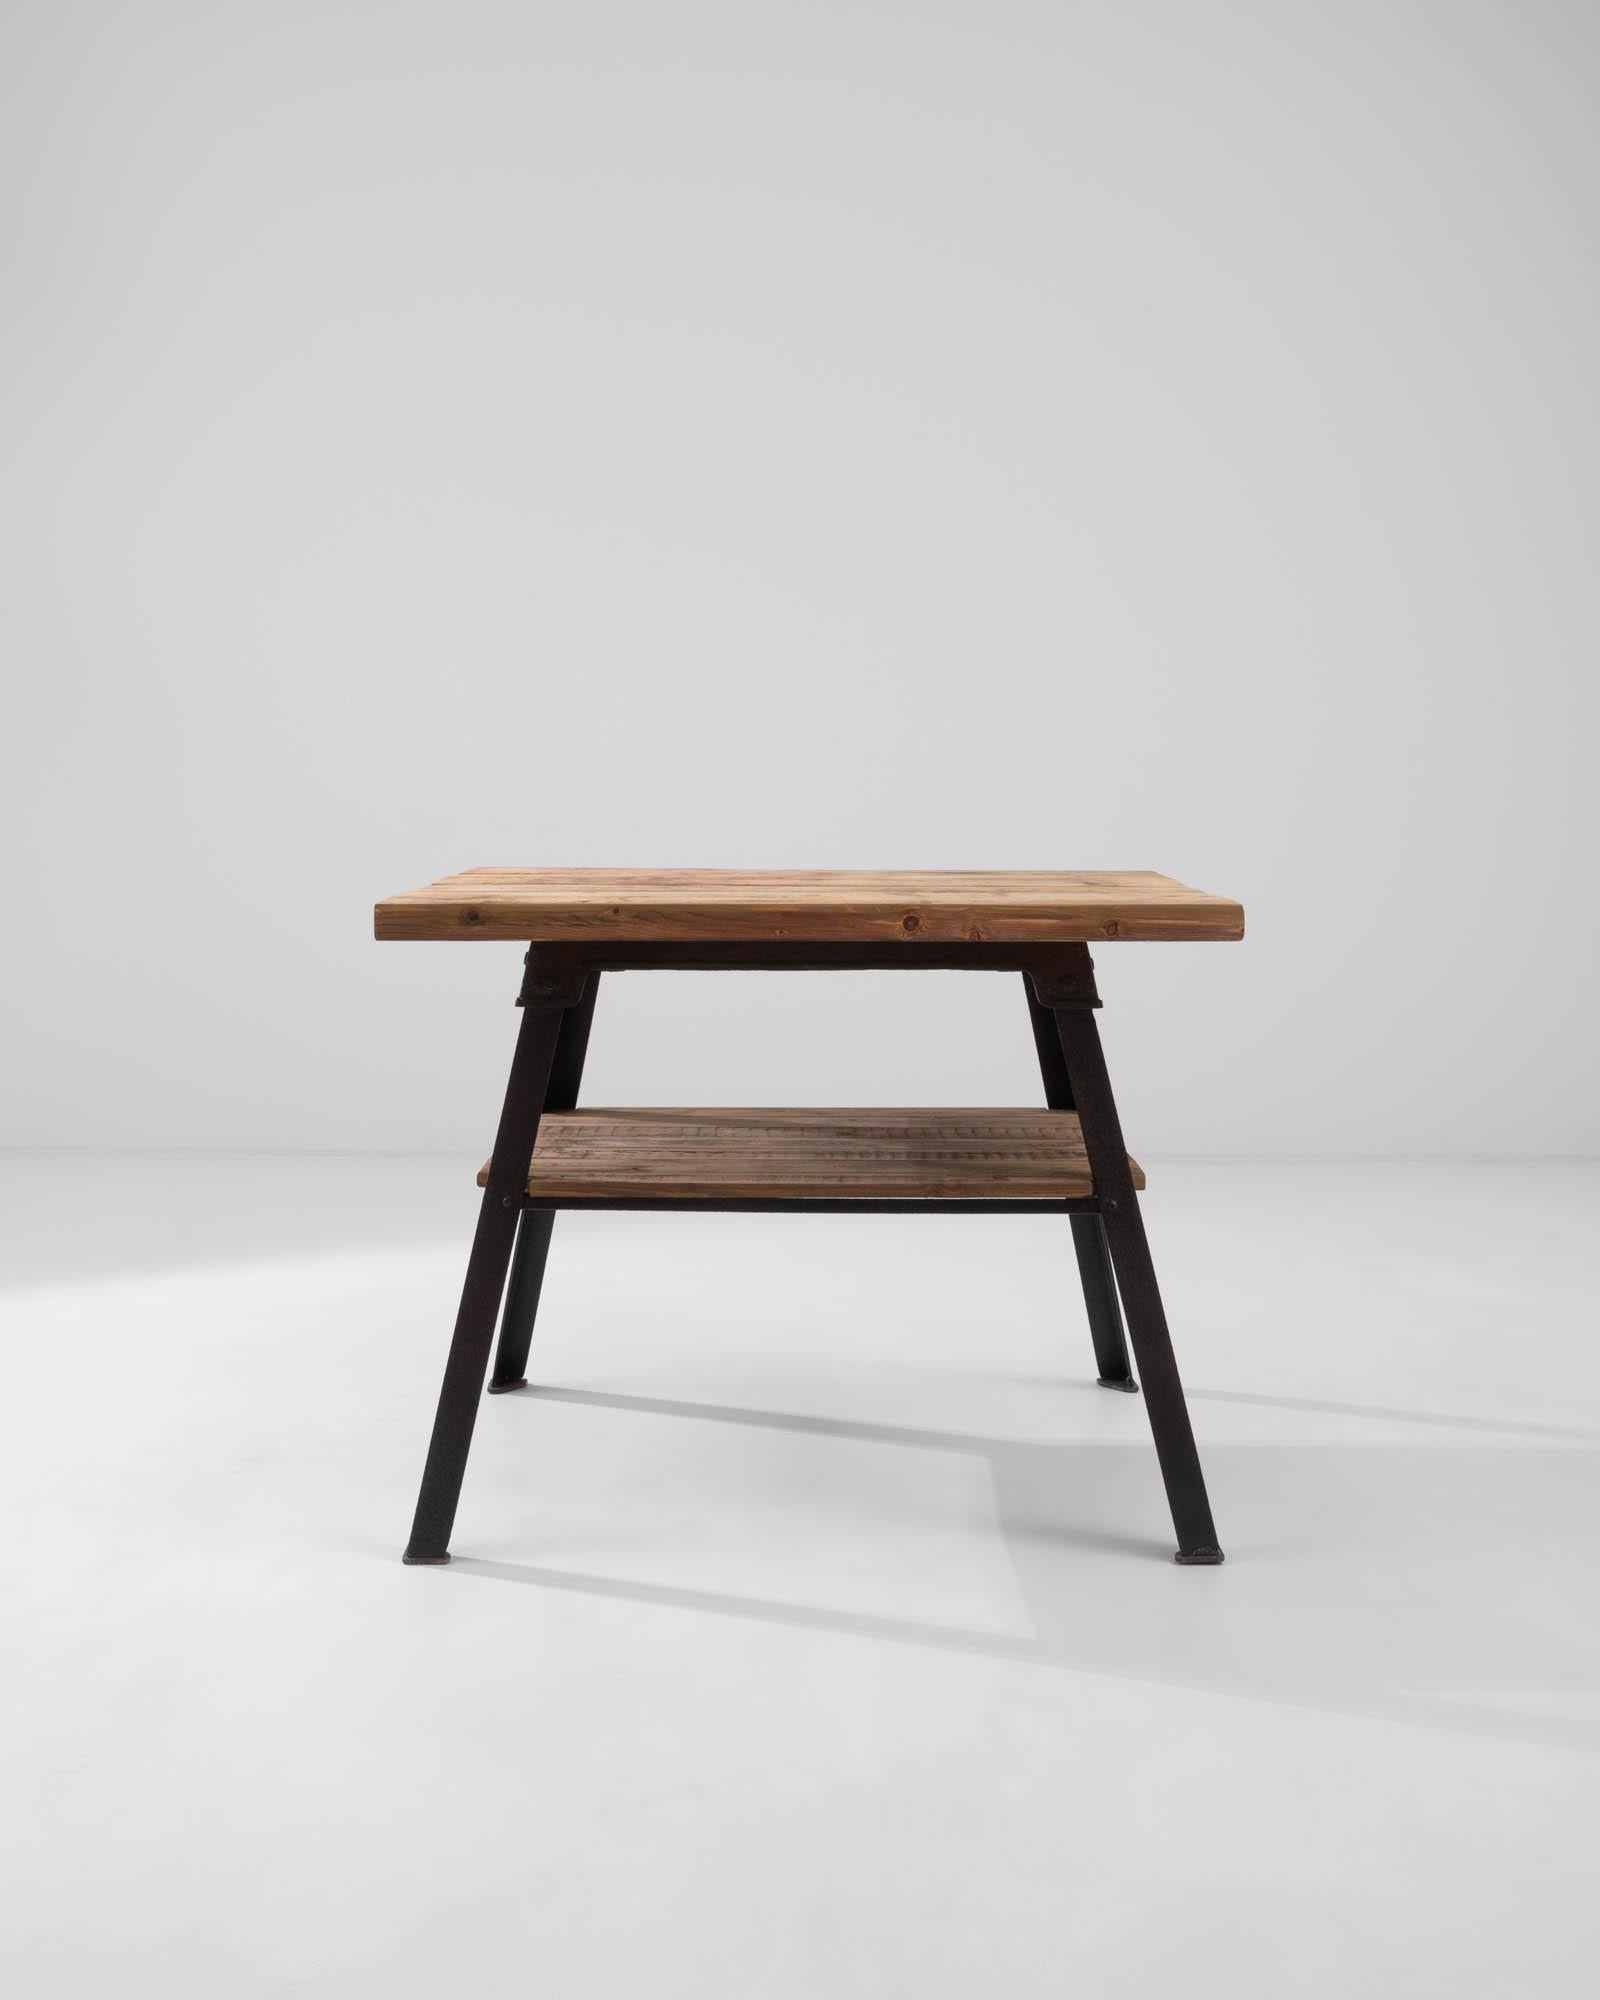 Stylish yet sturdy, this Industrial table offers a compelling vintage find. Built in France in the 20th century, a tabletop of natural wooden boards sits atop a cast iron frame. The bold angles of the legs create a striking trapezoid profile,